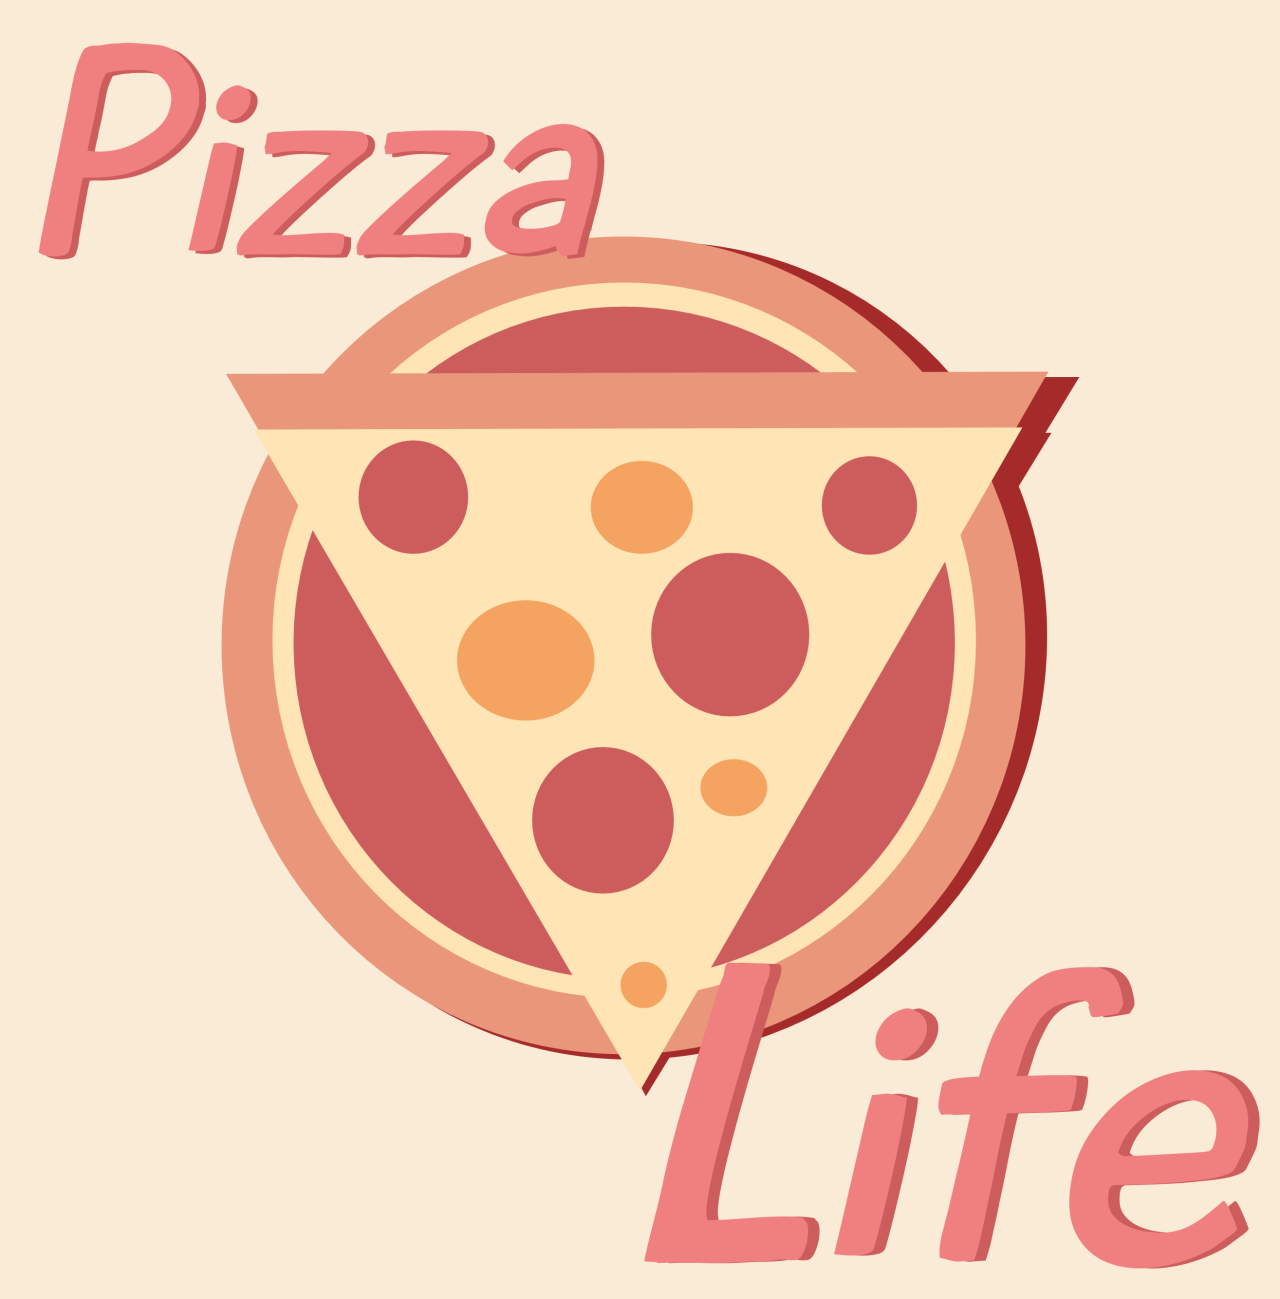 Pizza Life By Paradoxical Self Follow @: http://paradoxical-self.tumblr.com/ Instagram Twitter